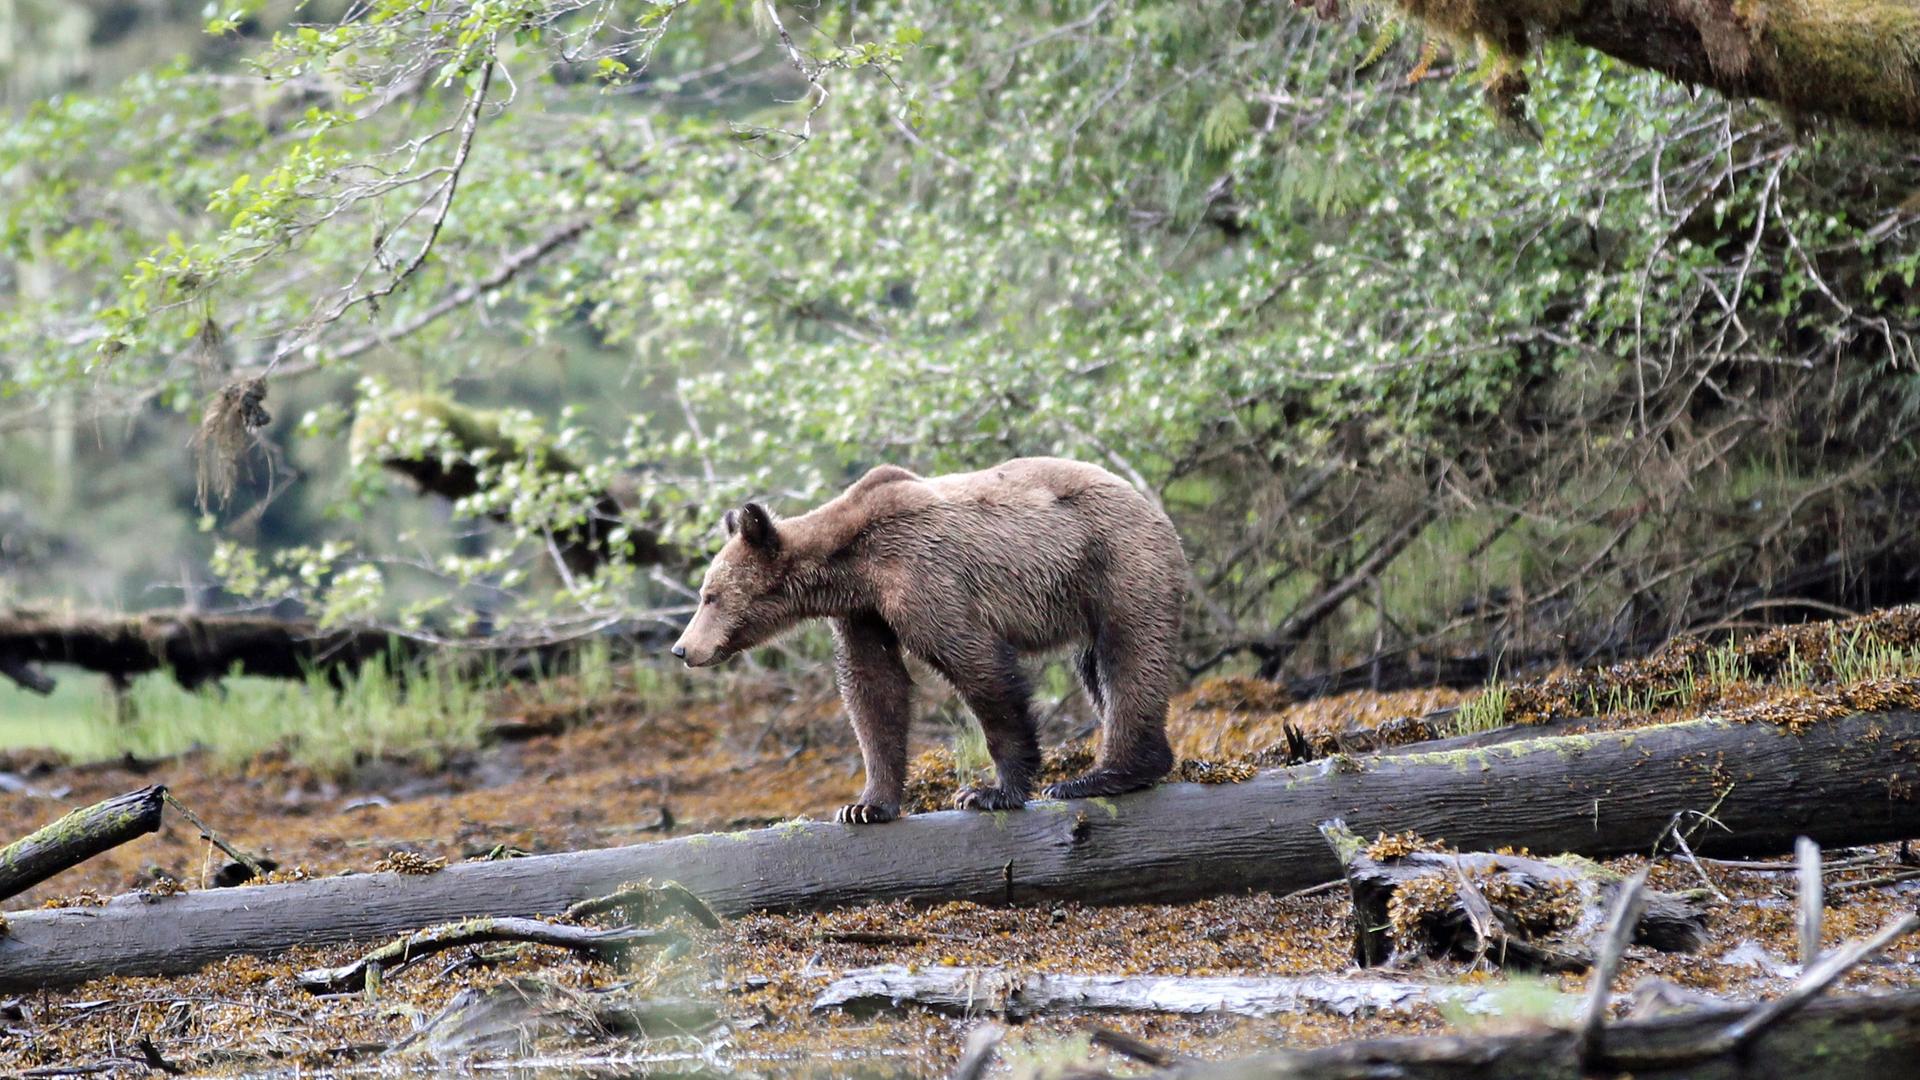 Grizzly bear cub in the Great Bear Rainforest